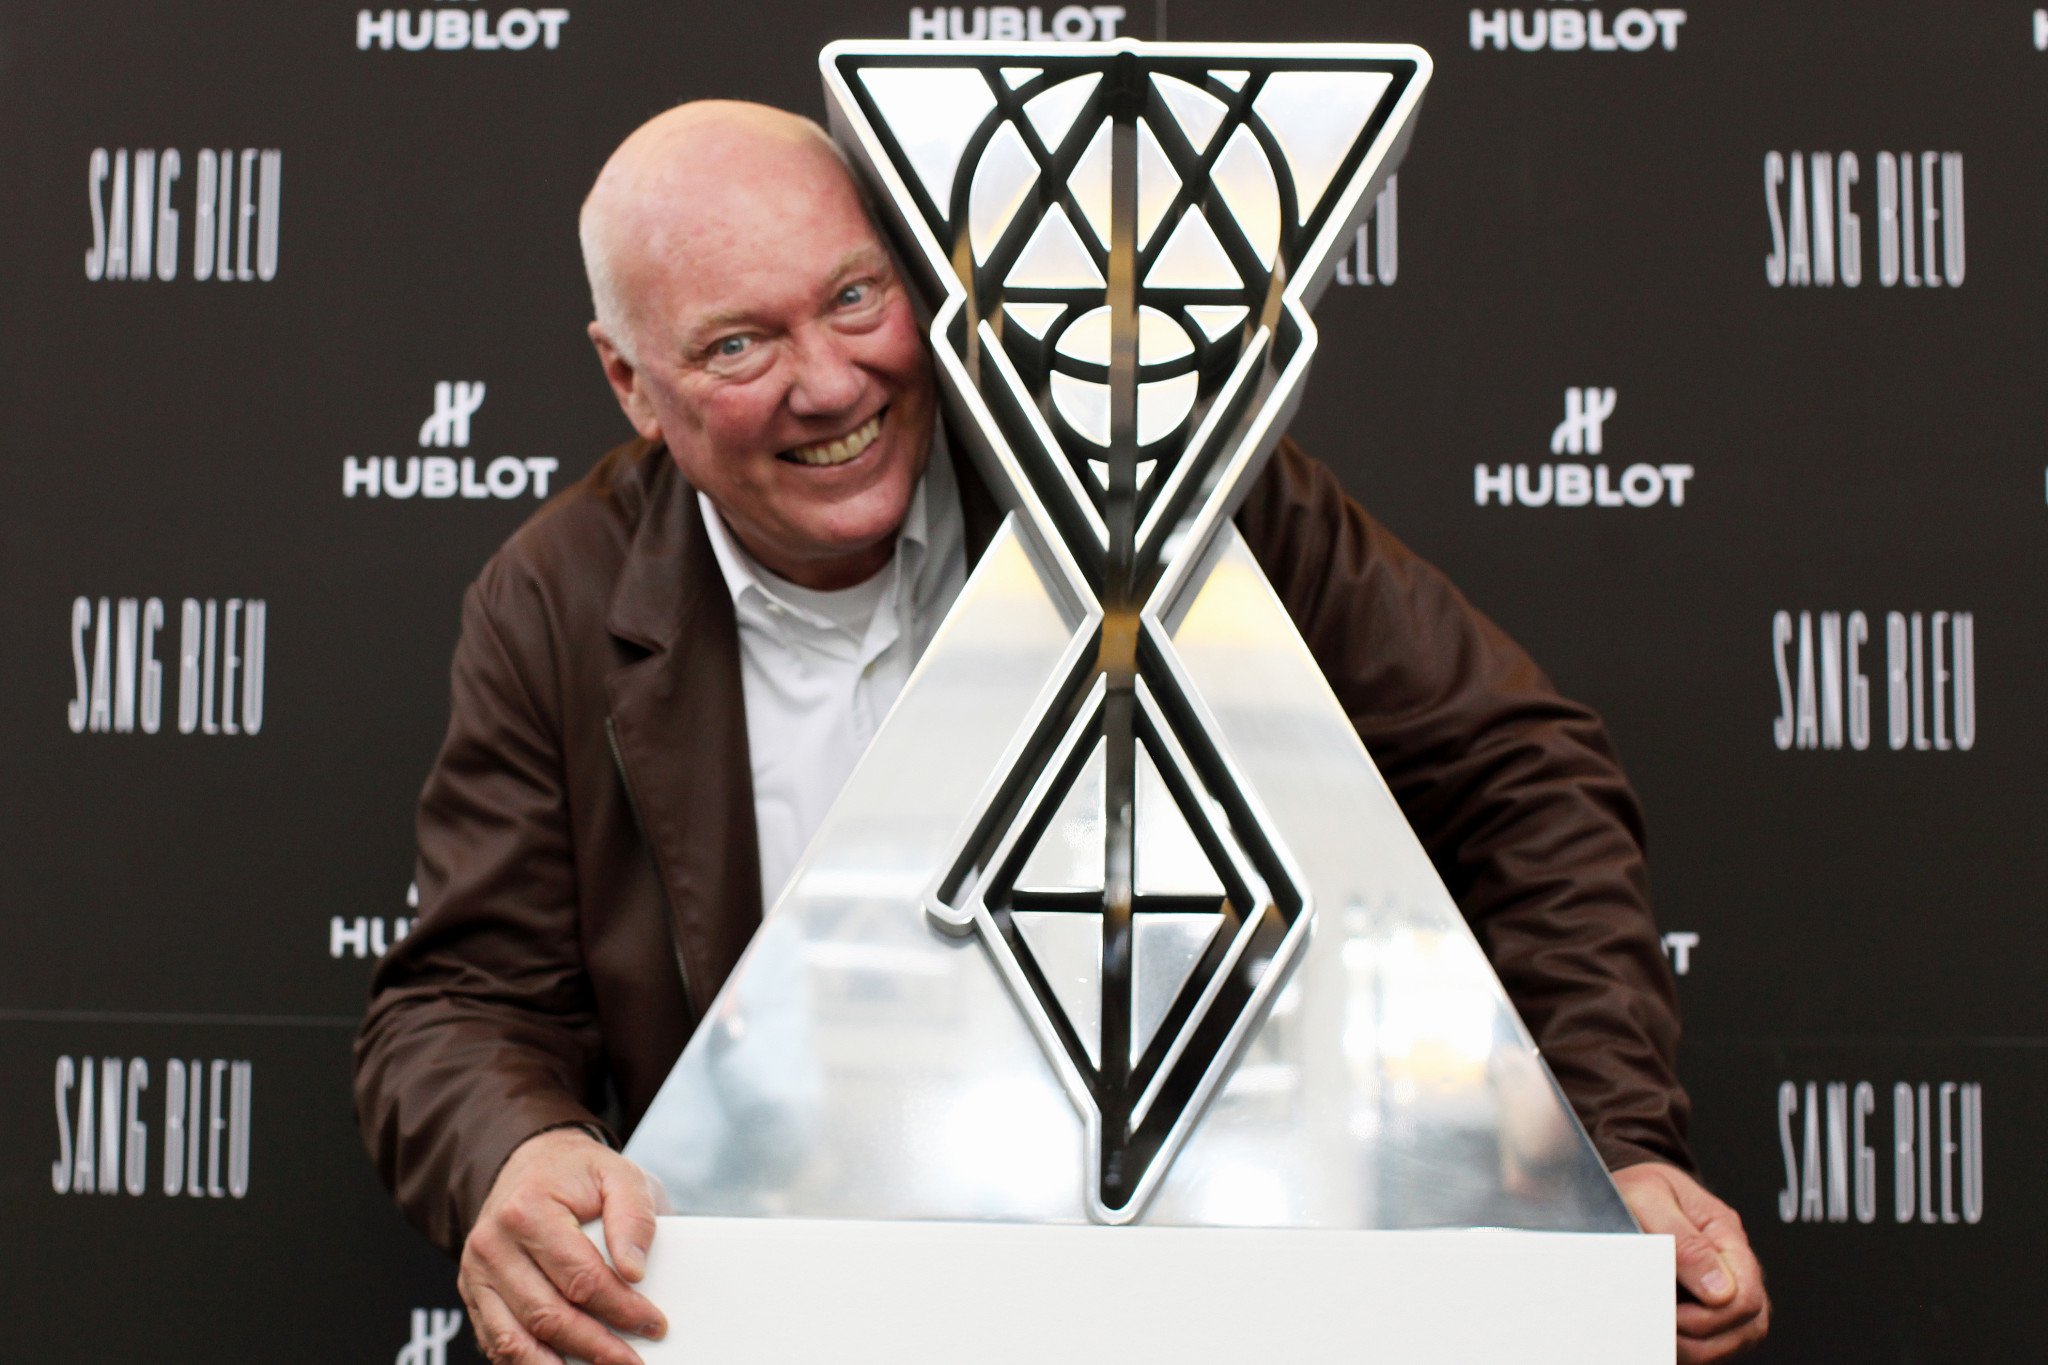 Jean claude biver and the surprising and audacious glass and metal sculpture created by sang bleu